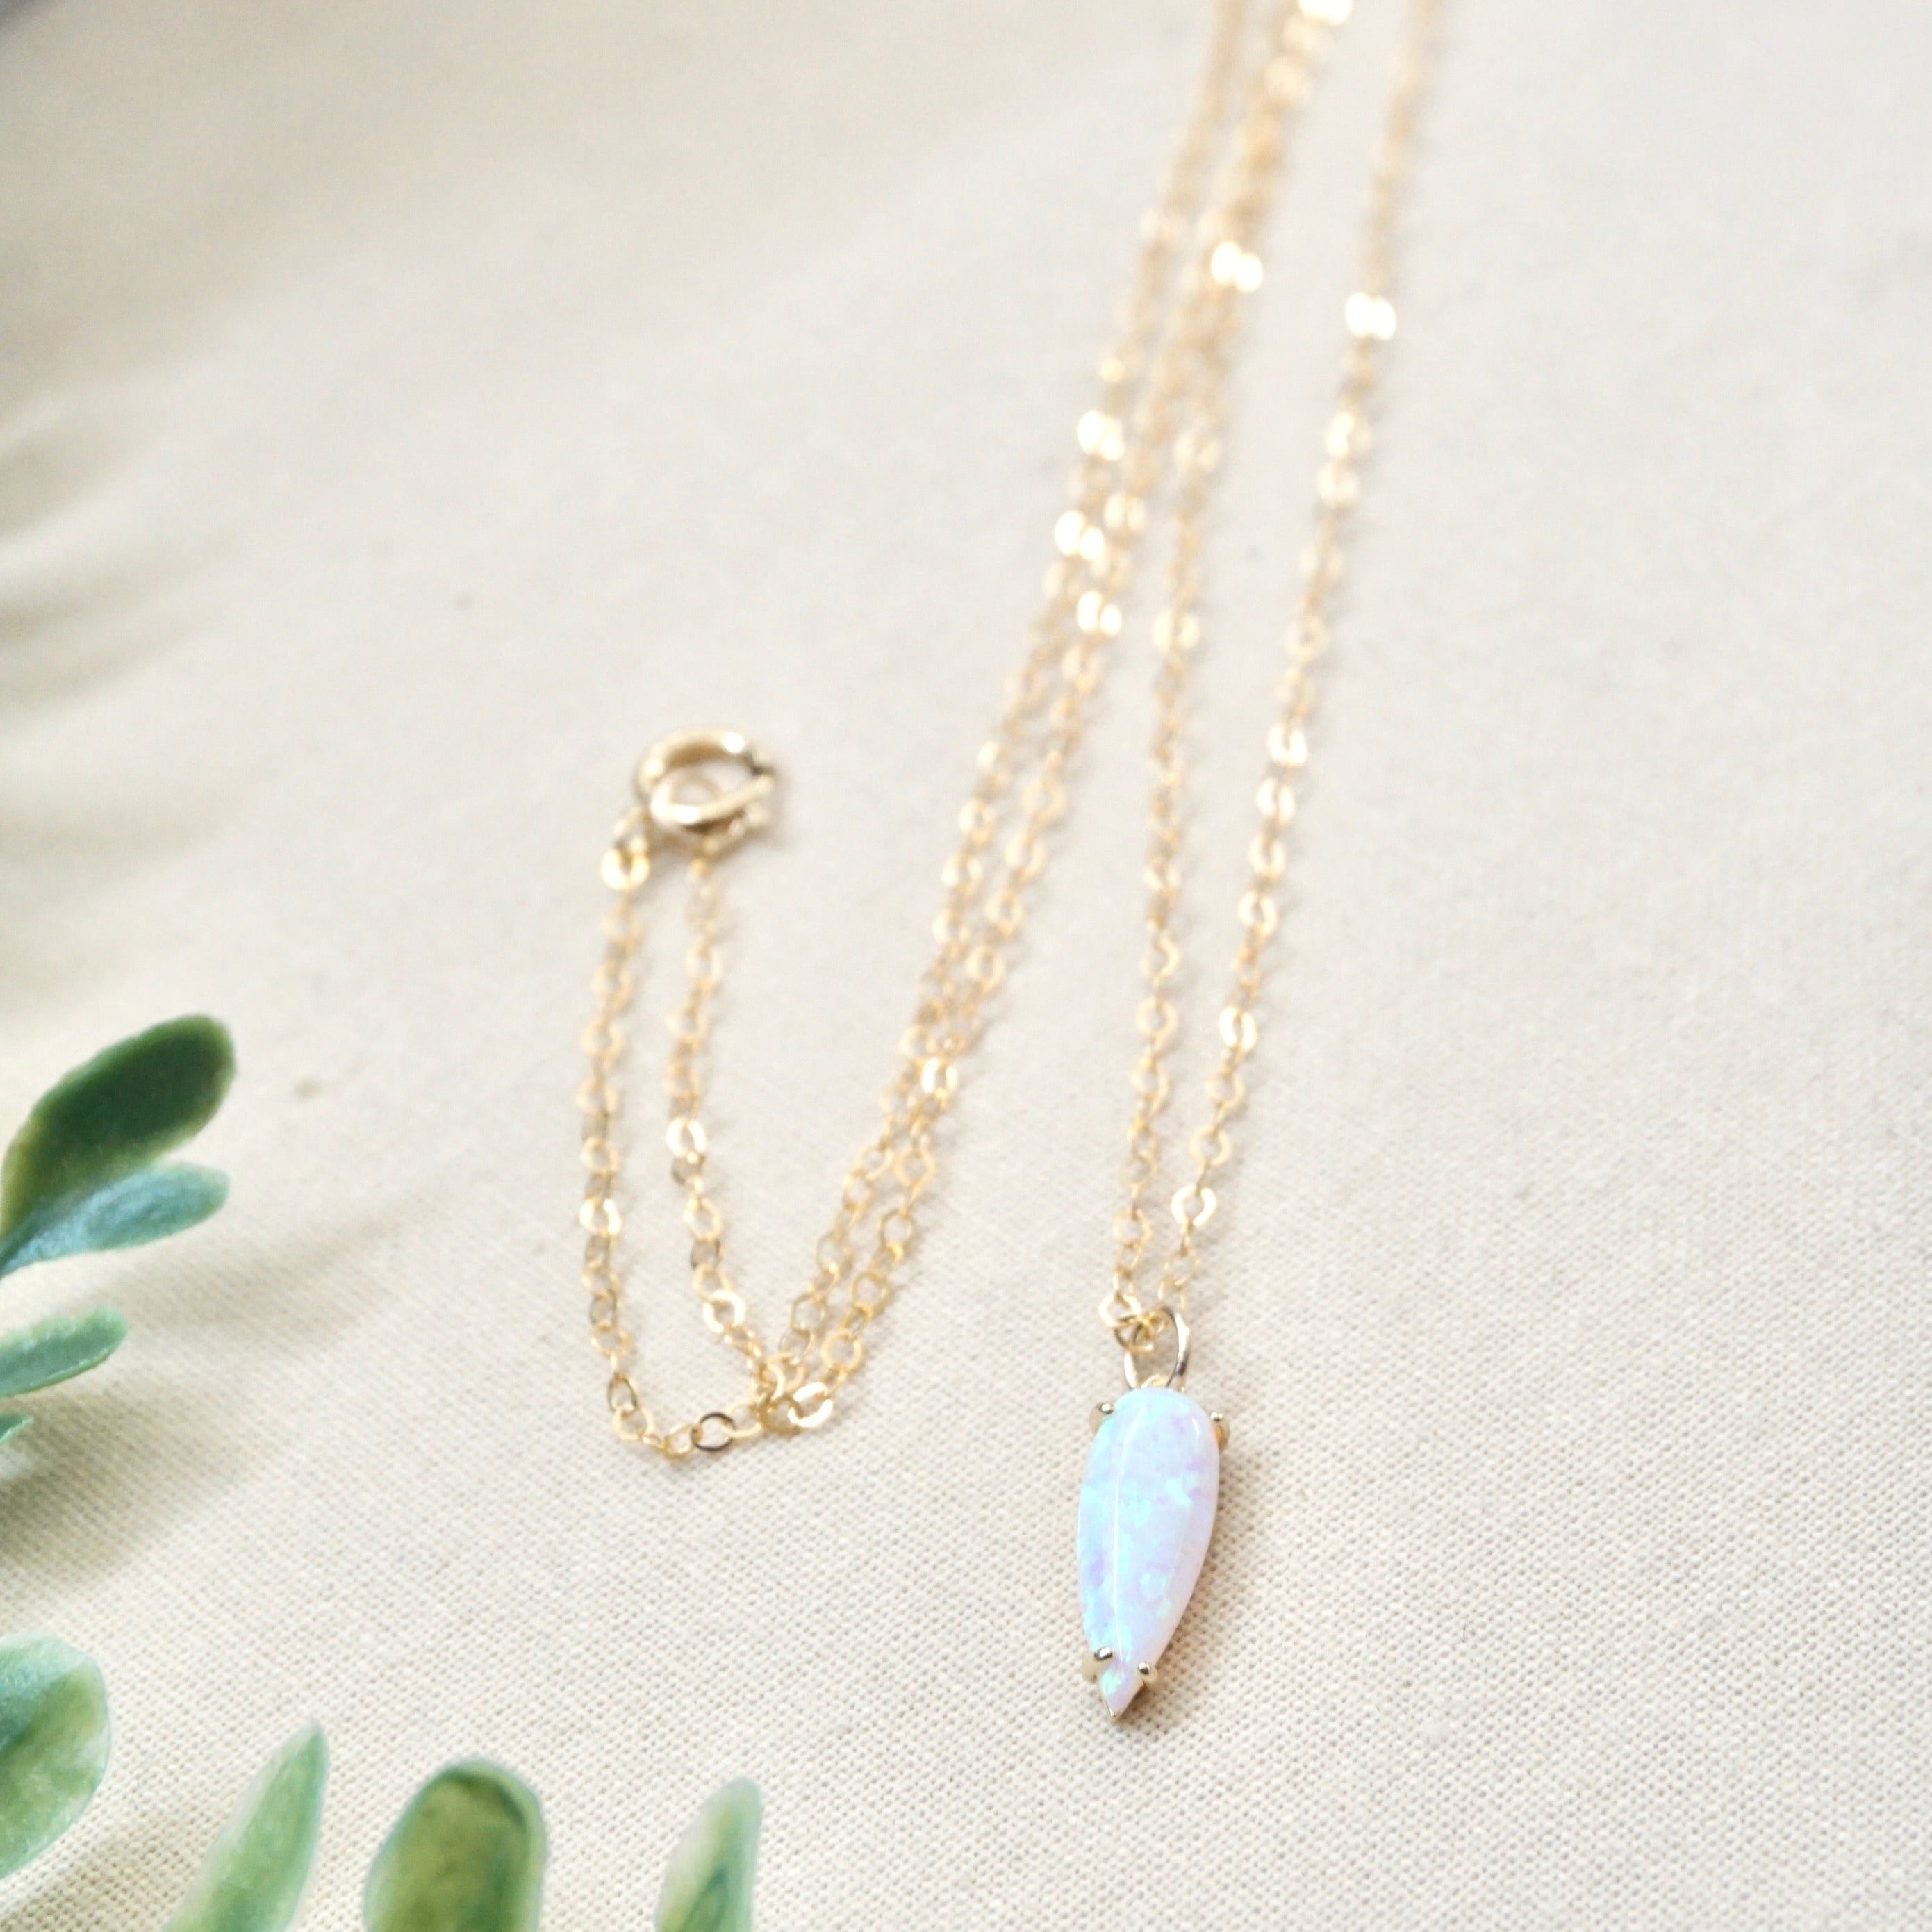 Opal necklace — The Watchmaker's Daughter